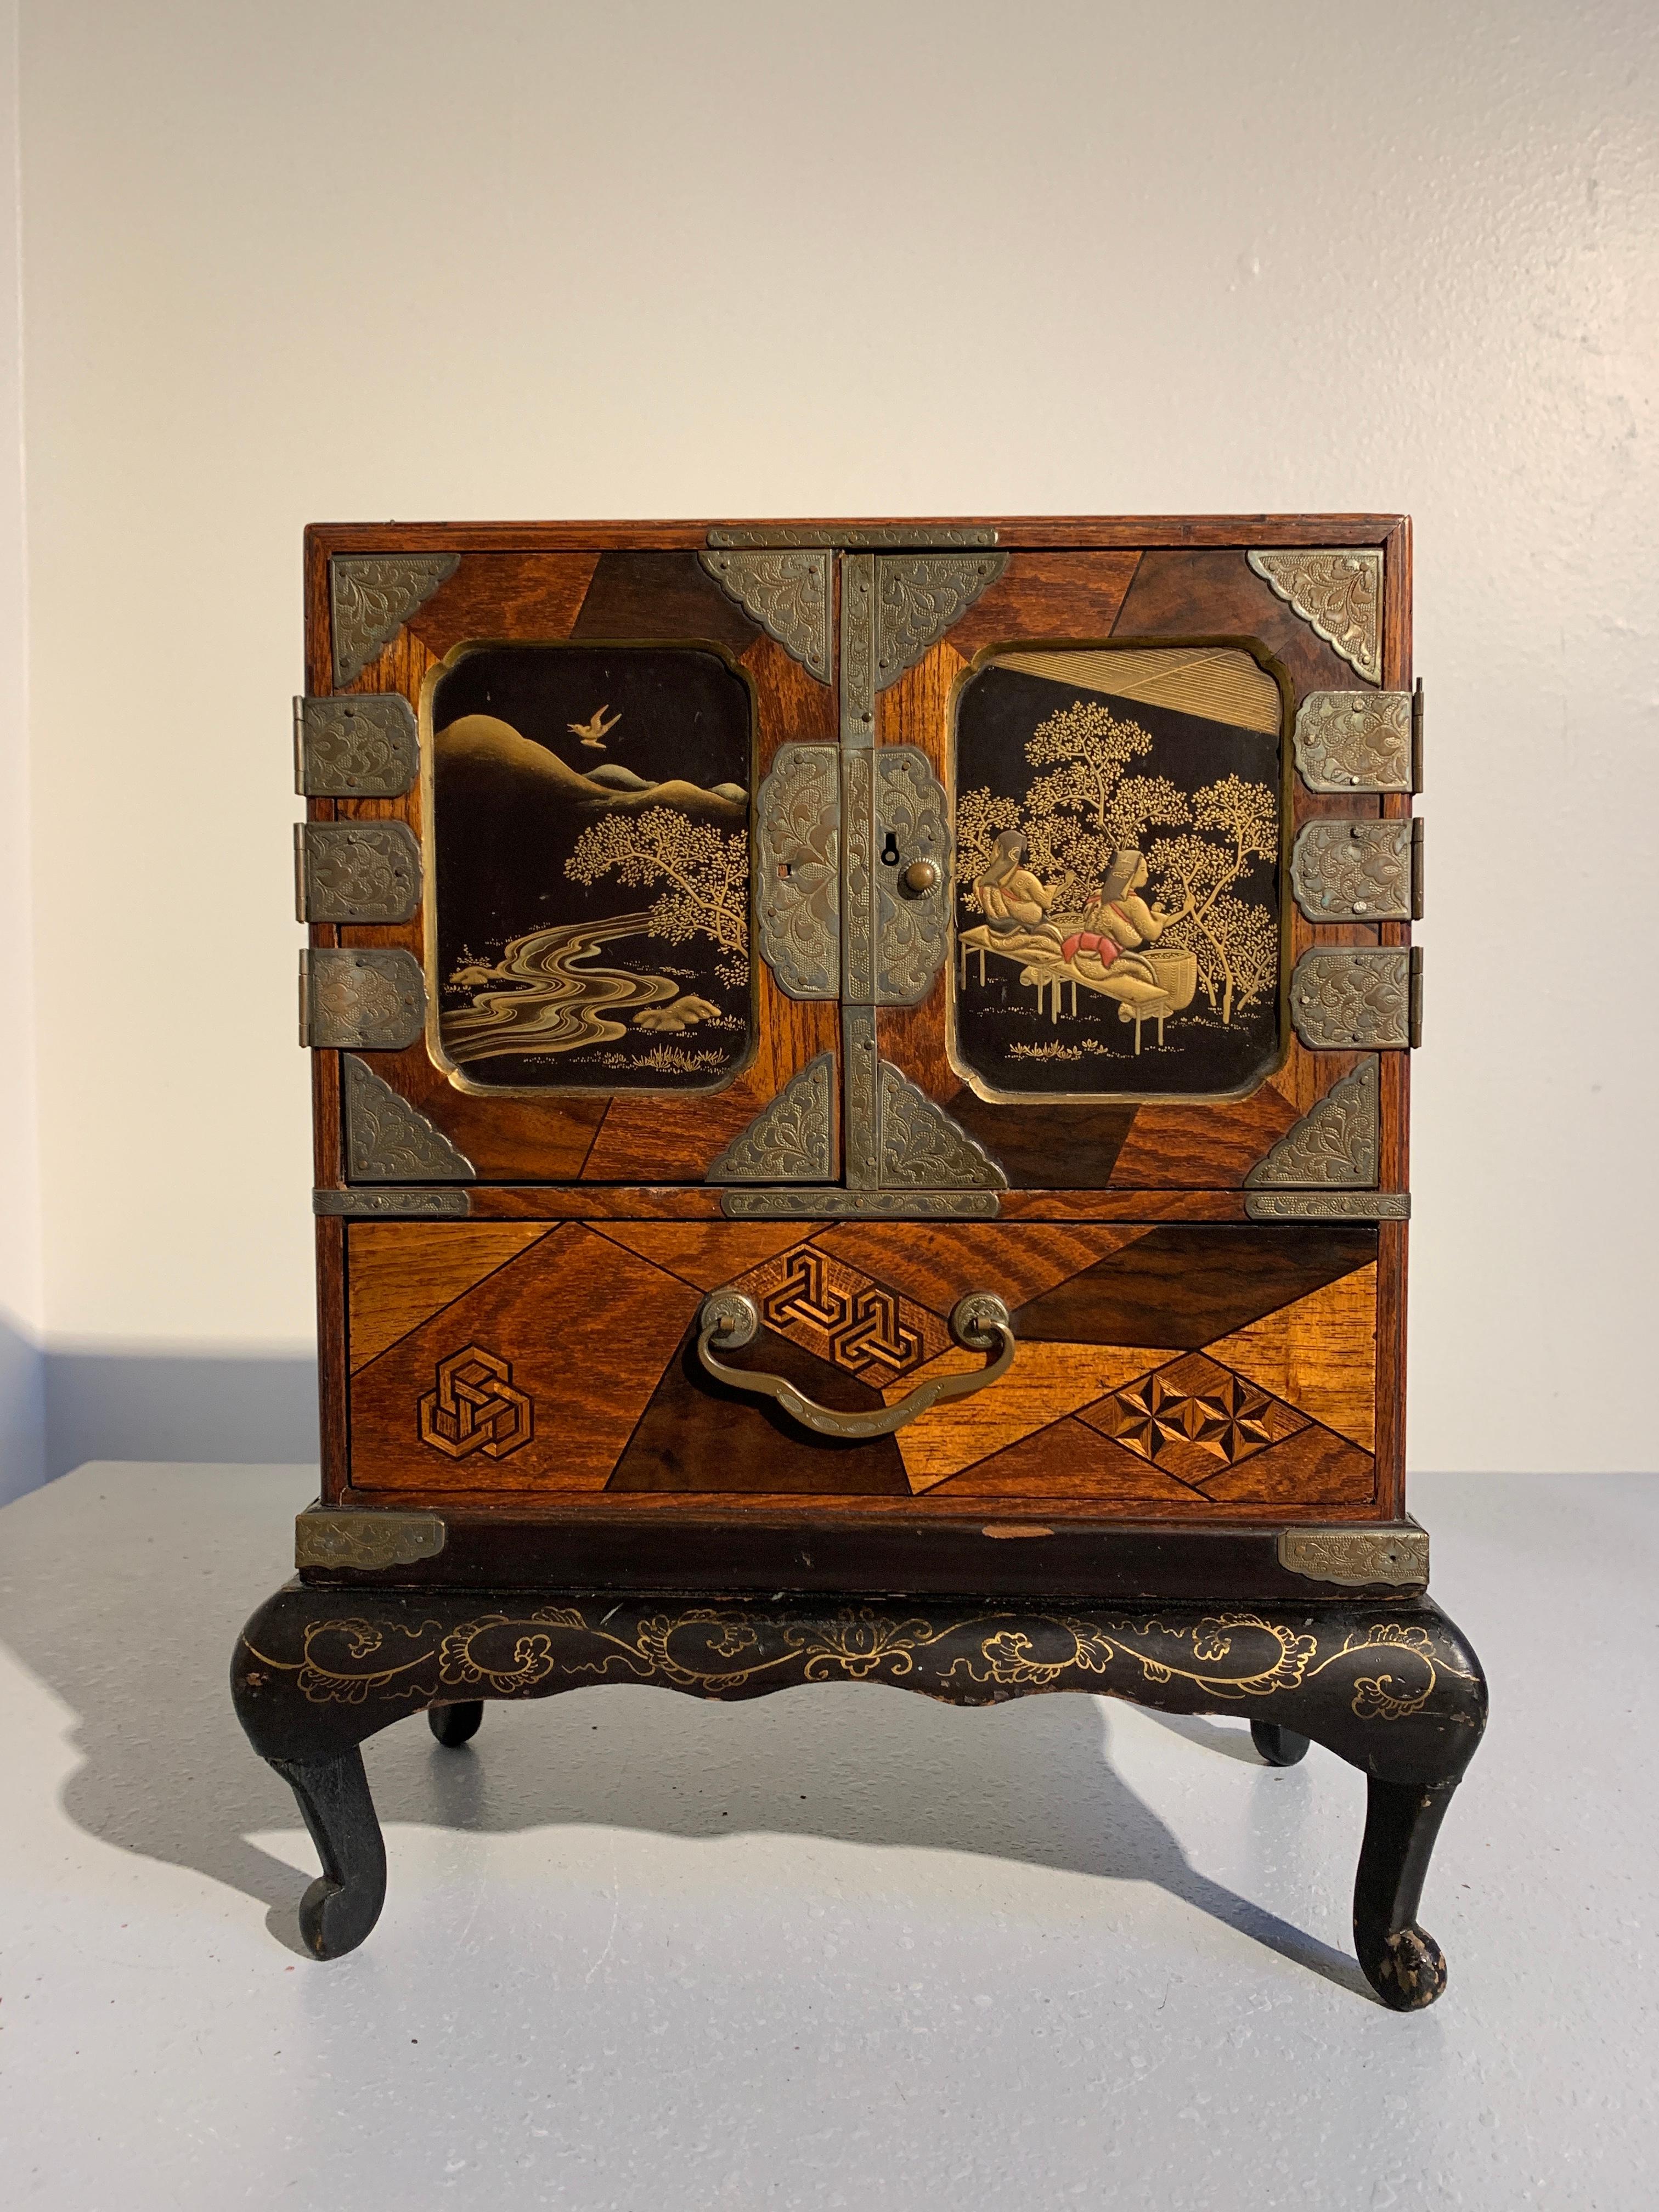 A fine Japanese Meiji Period miniature tansu, known as a hairbako, featuring exquisite lacquer decorated doors and beautiful marquetry work, circa 1890. 

A haribako is a sewing, jewelry or trinket box, often modeled after larger clothing tansu.